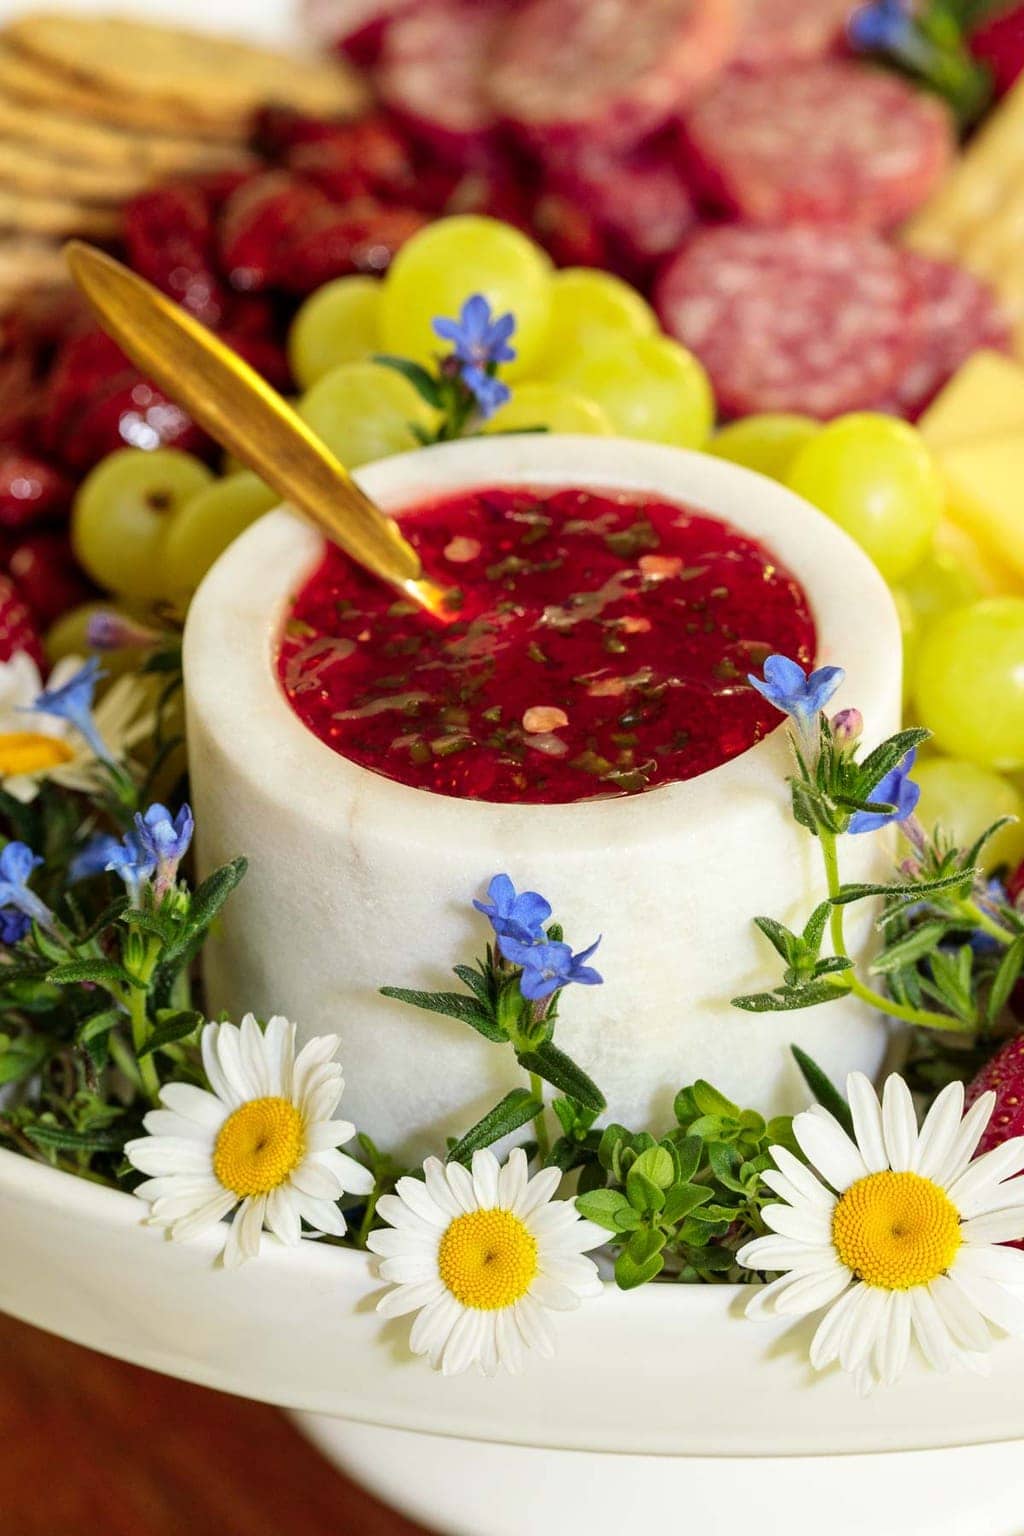 Photo of an appetizer plate featuring Easy Strawberry Jalapeño Jam surrounded by decorative flowers in the foreground and appetizer snacks in the background.